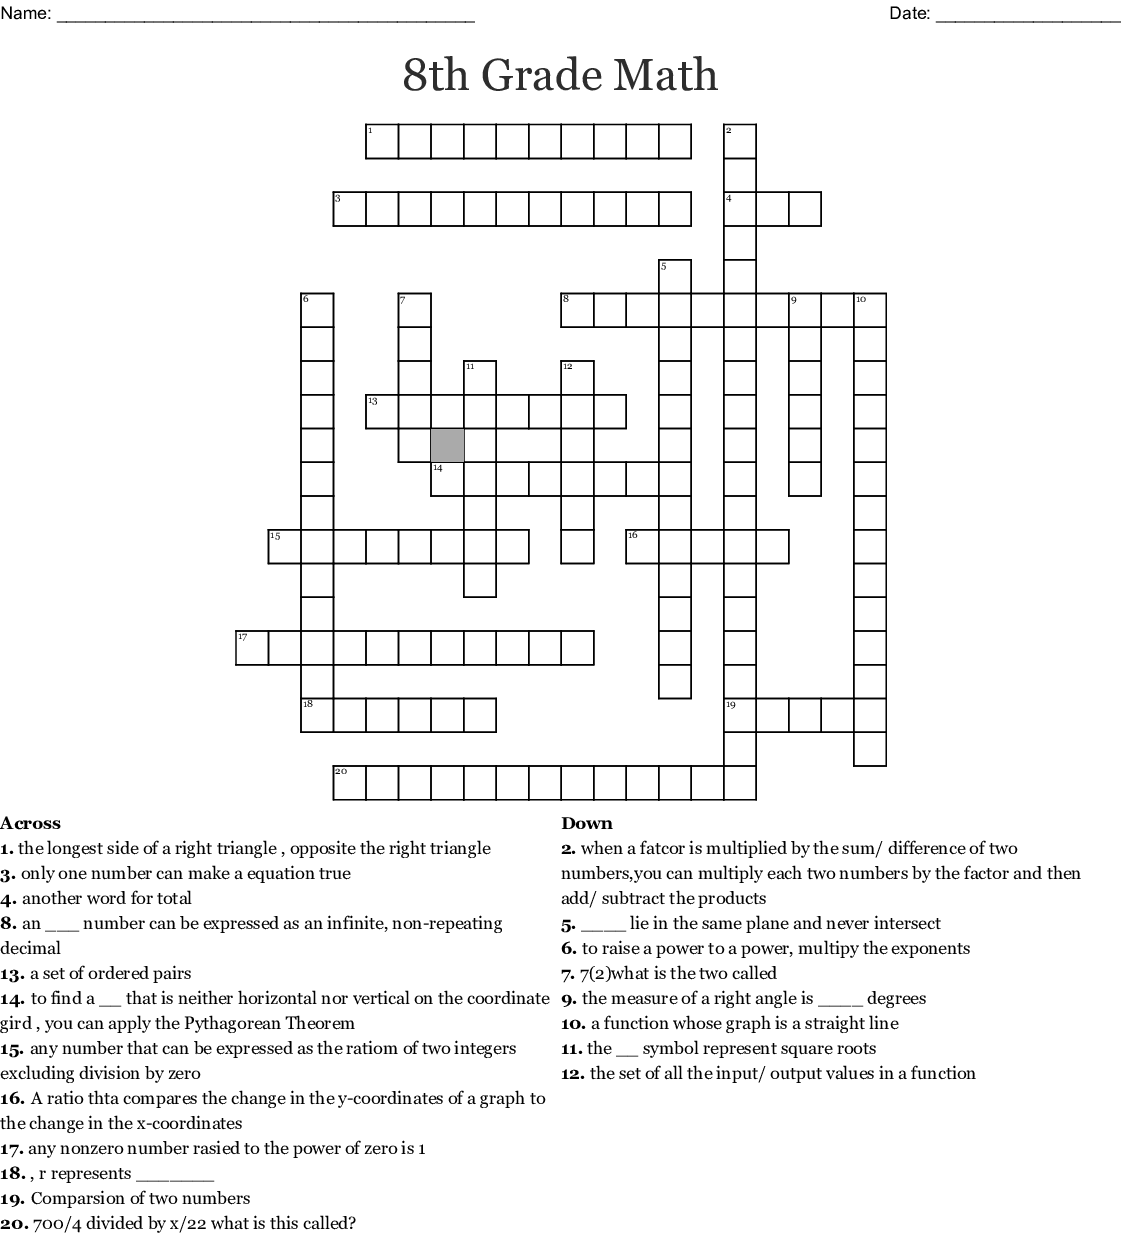 Free Printable Crossword Puzzles For 8th Grade